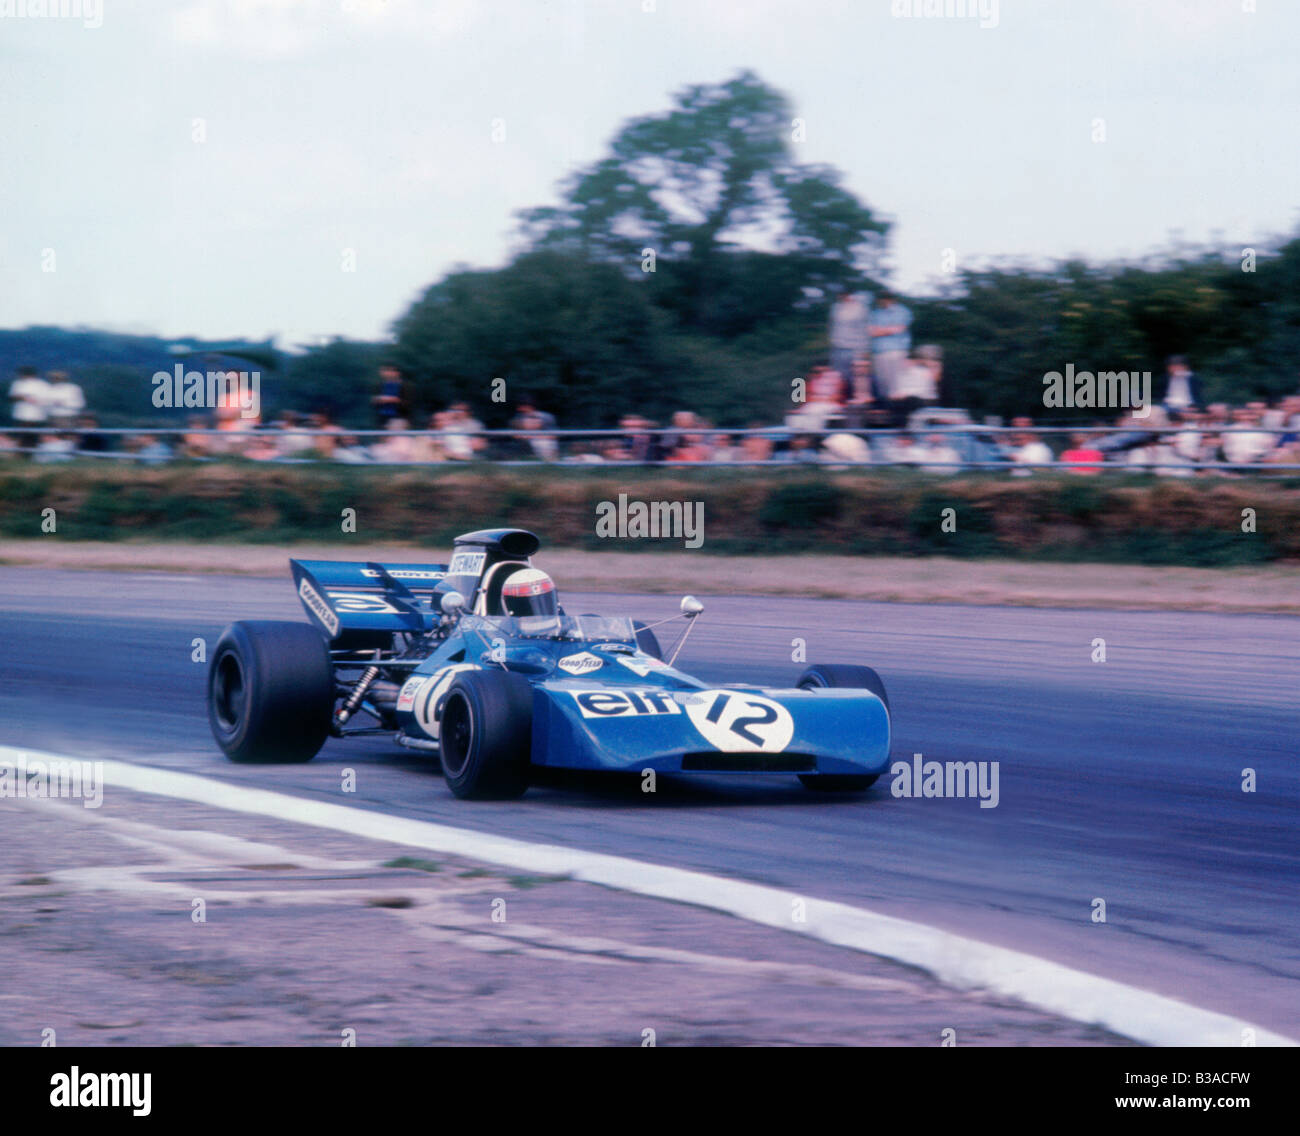 Tyrrell 003 driven by Jackie Stewart on his way to victory in the 1971 British GP. Stock Photo